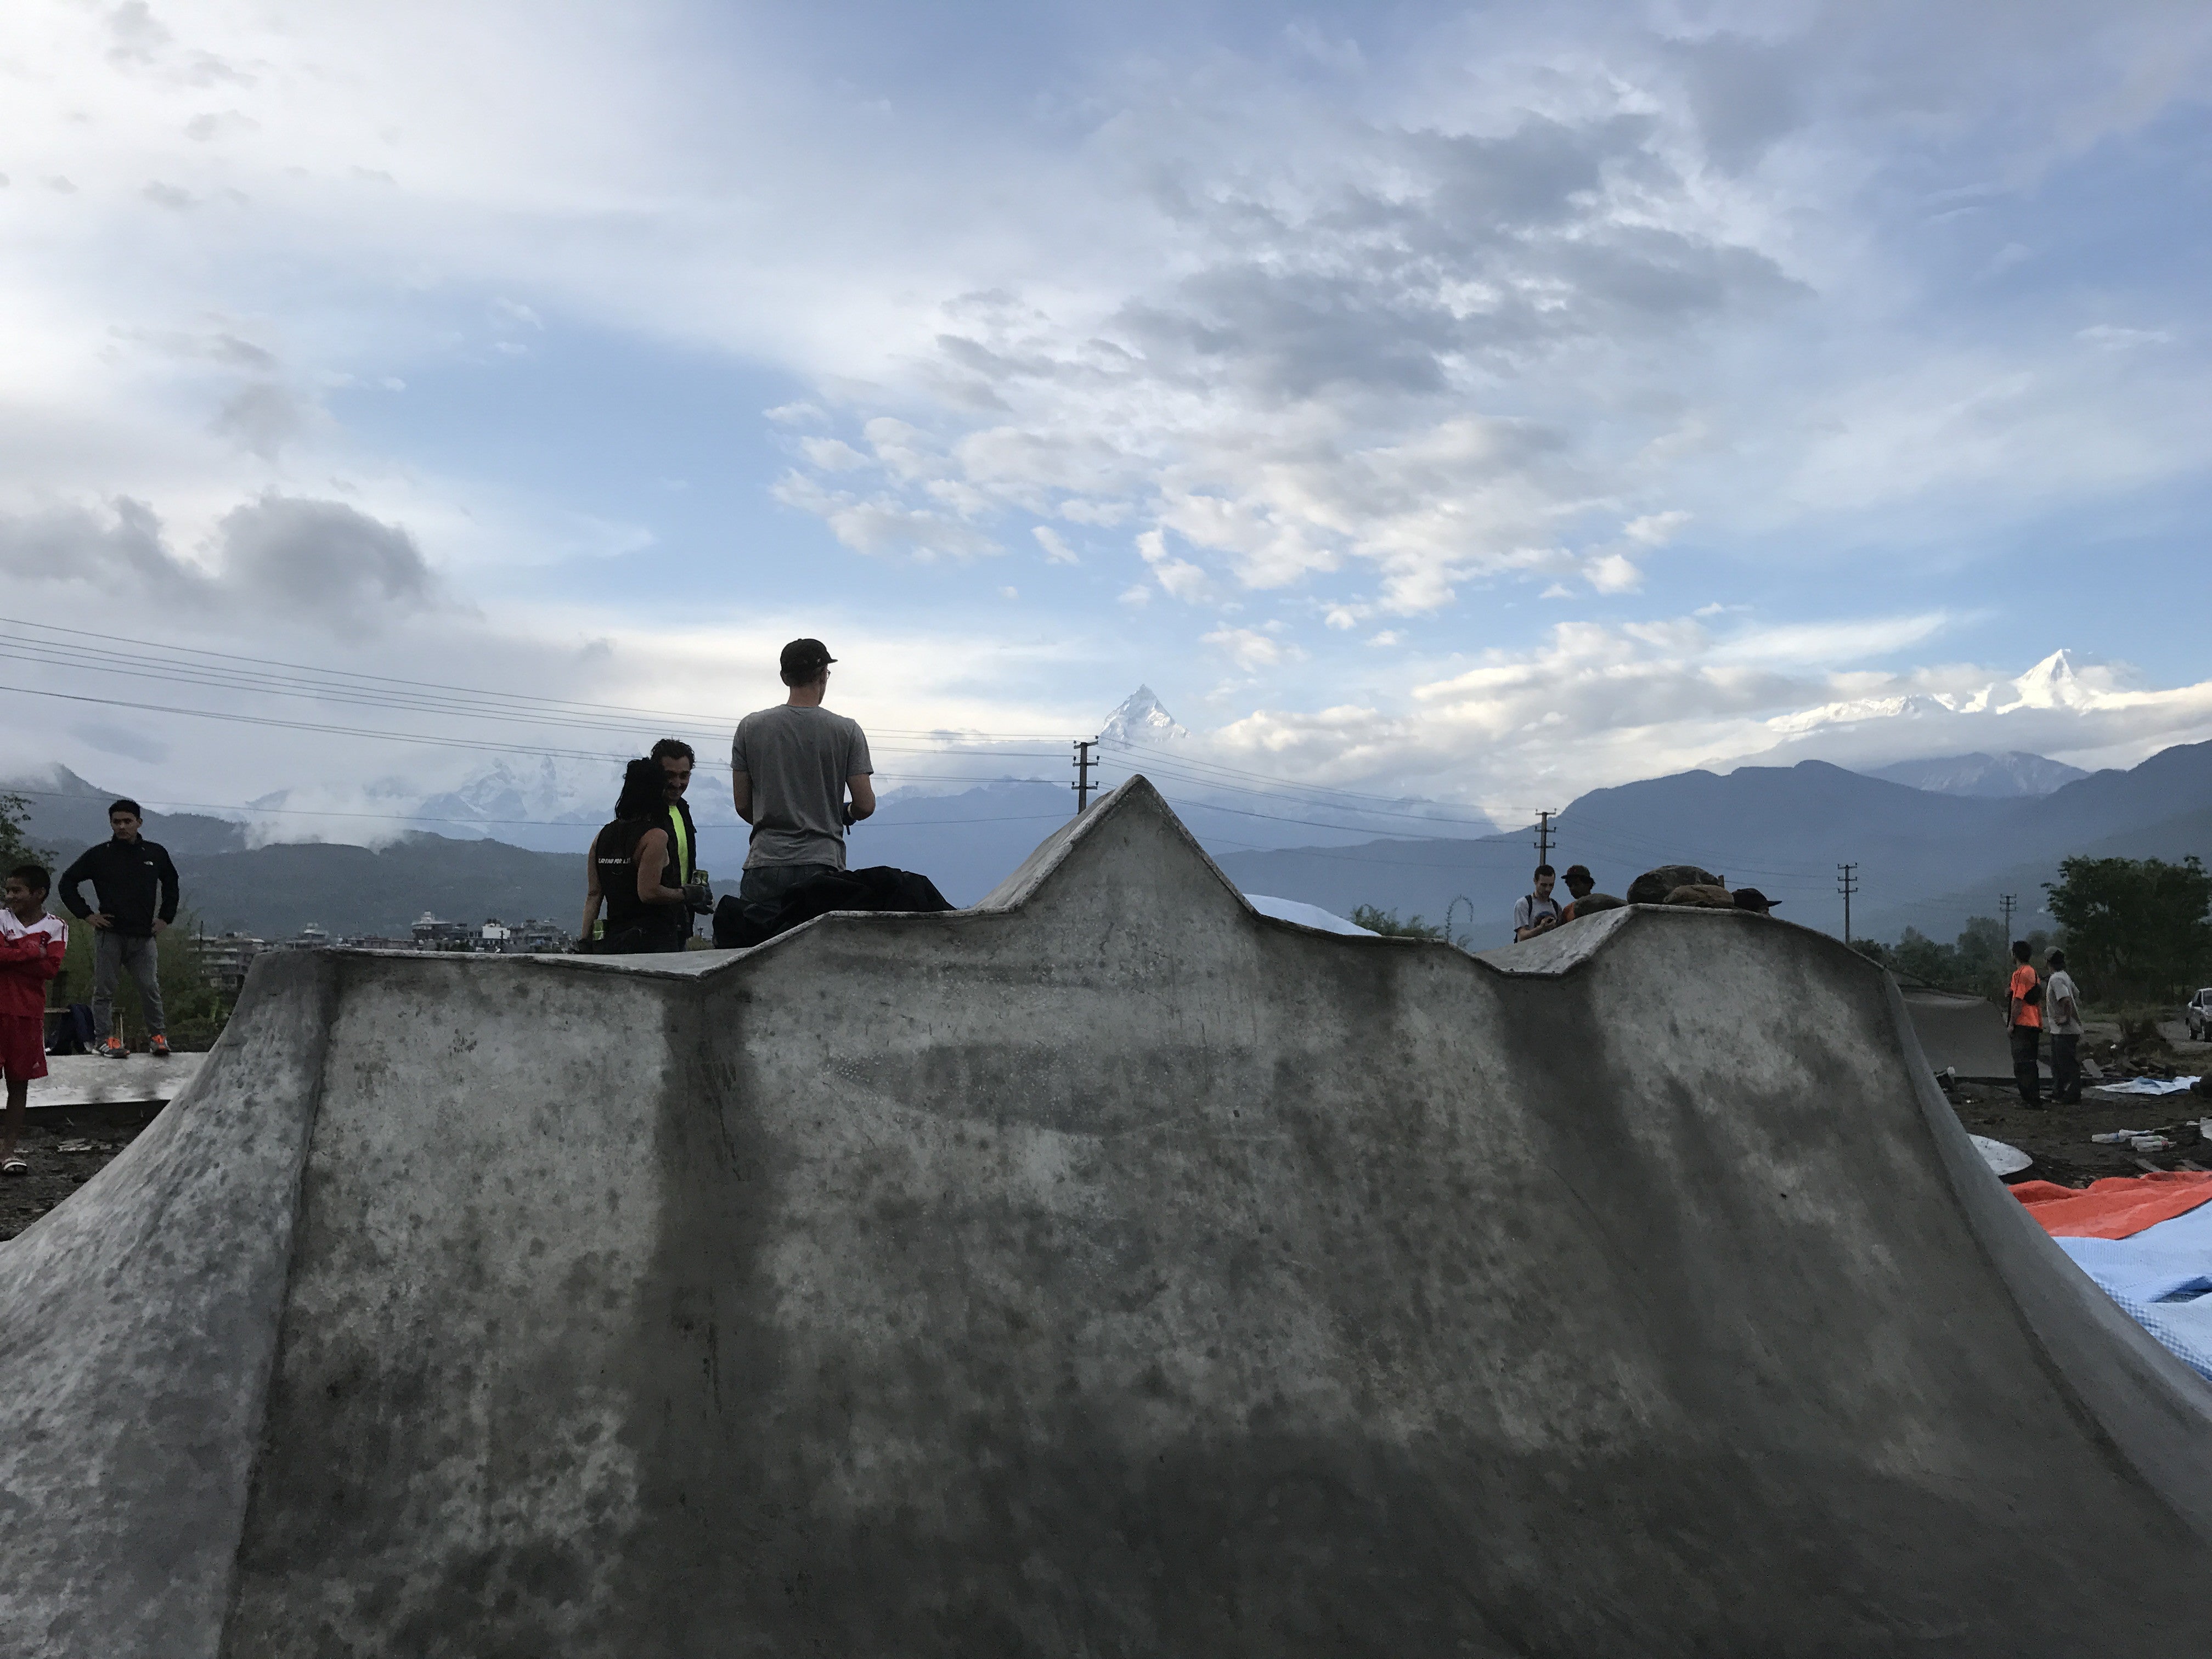 annapurna skatepark with fishtale mountain in the background